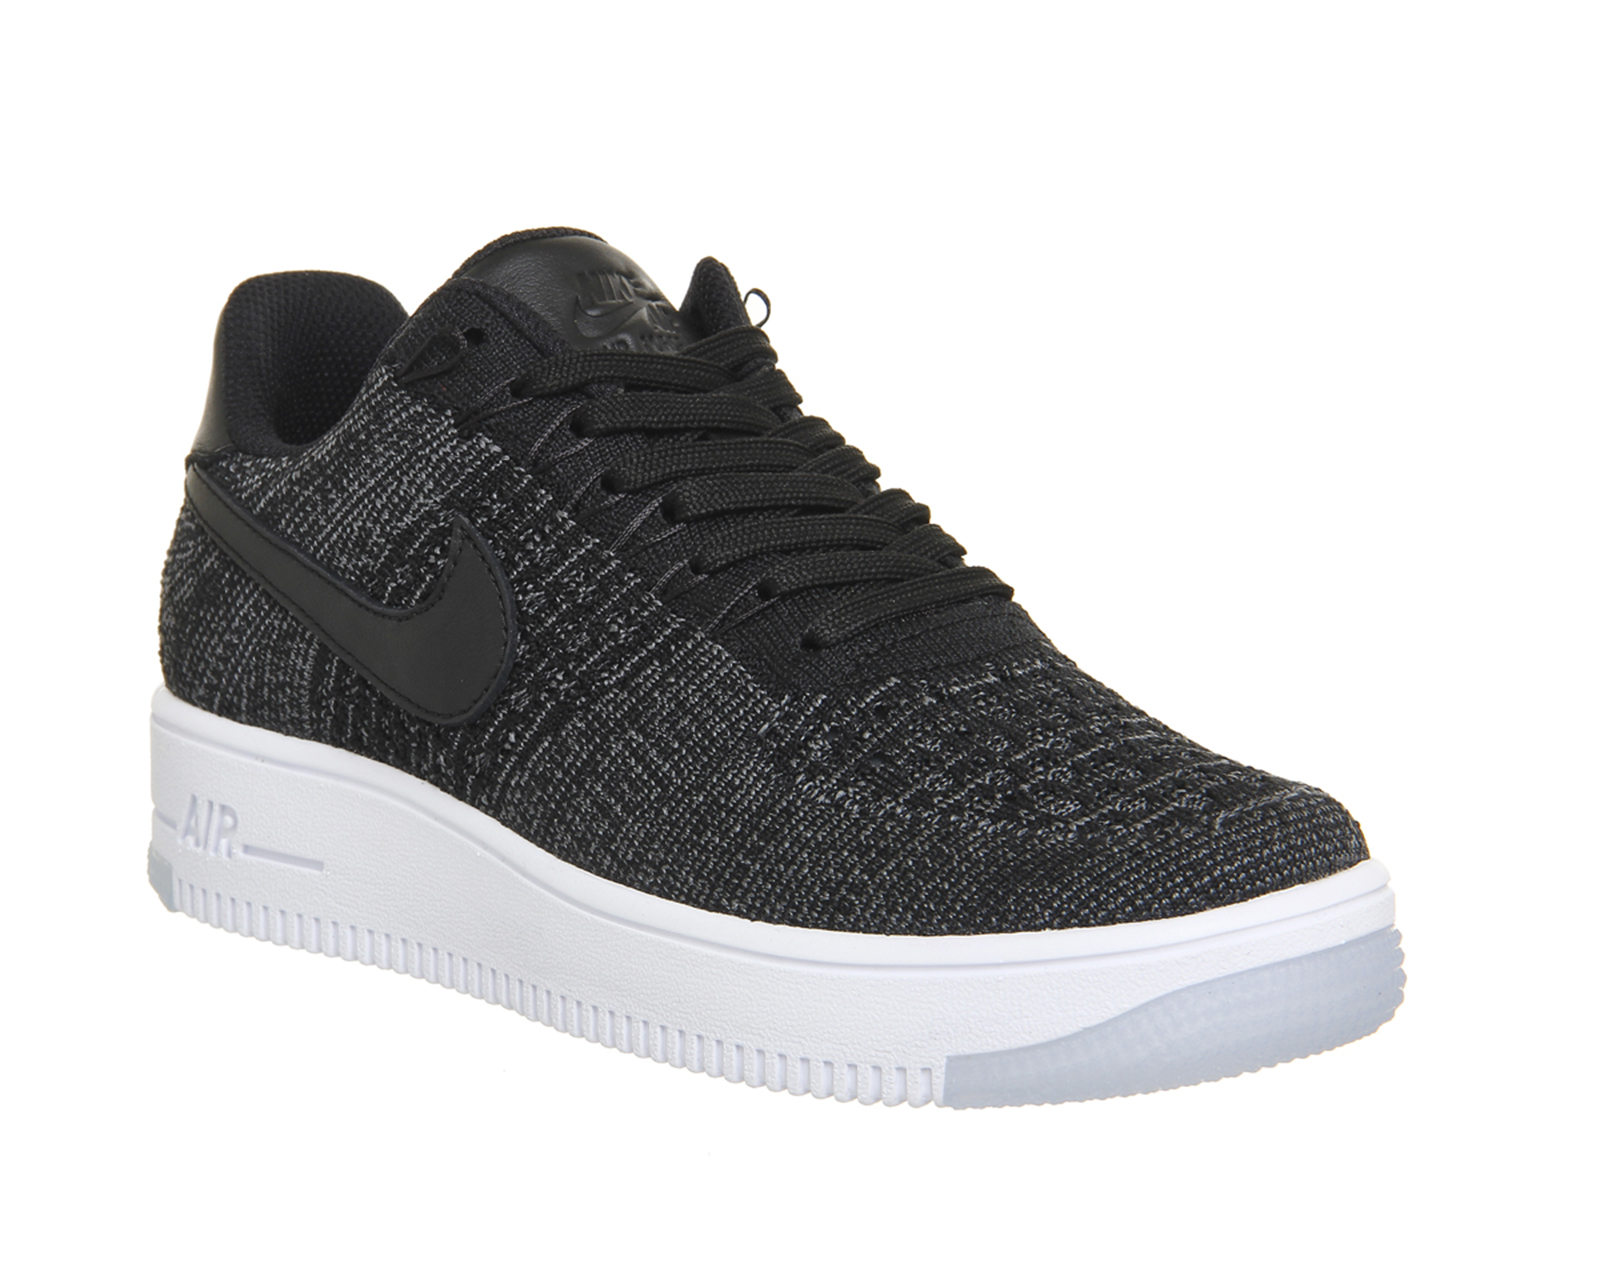 Air Force 1 Flyknit Black And White Flash Sales, SAVE 36% - lutheranems.com